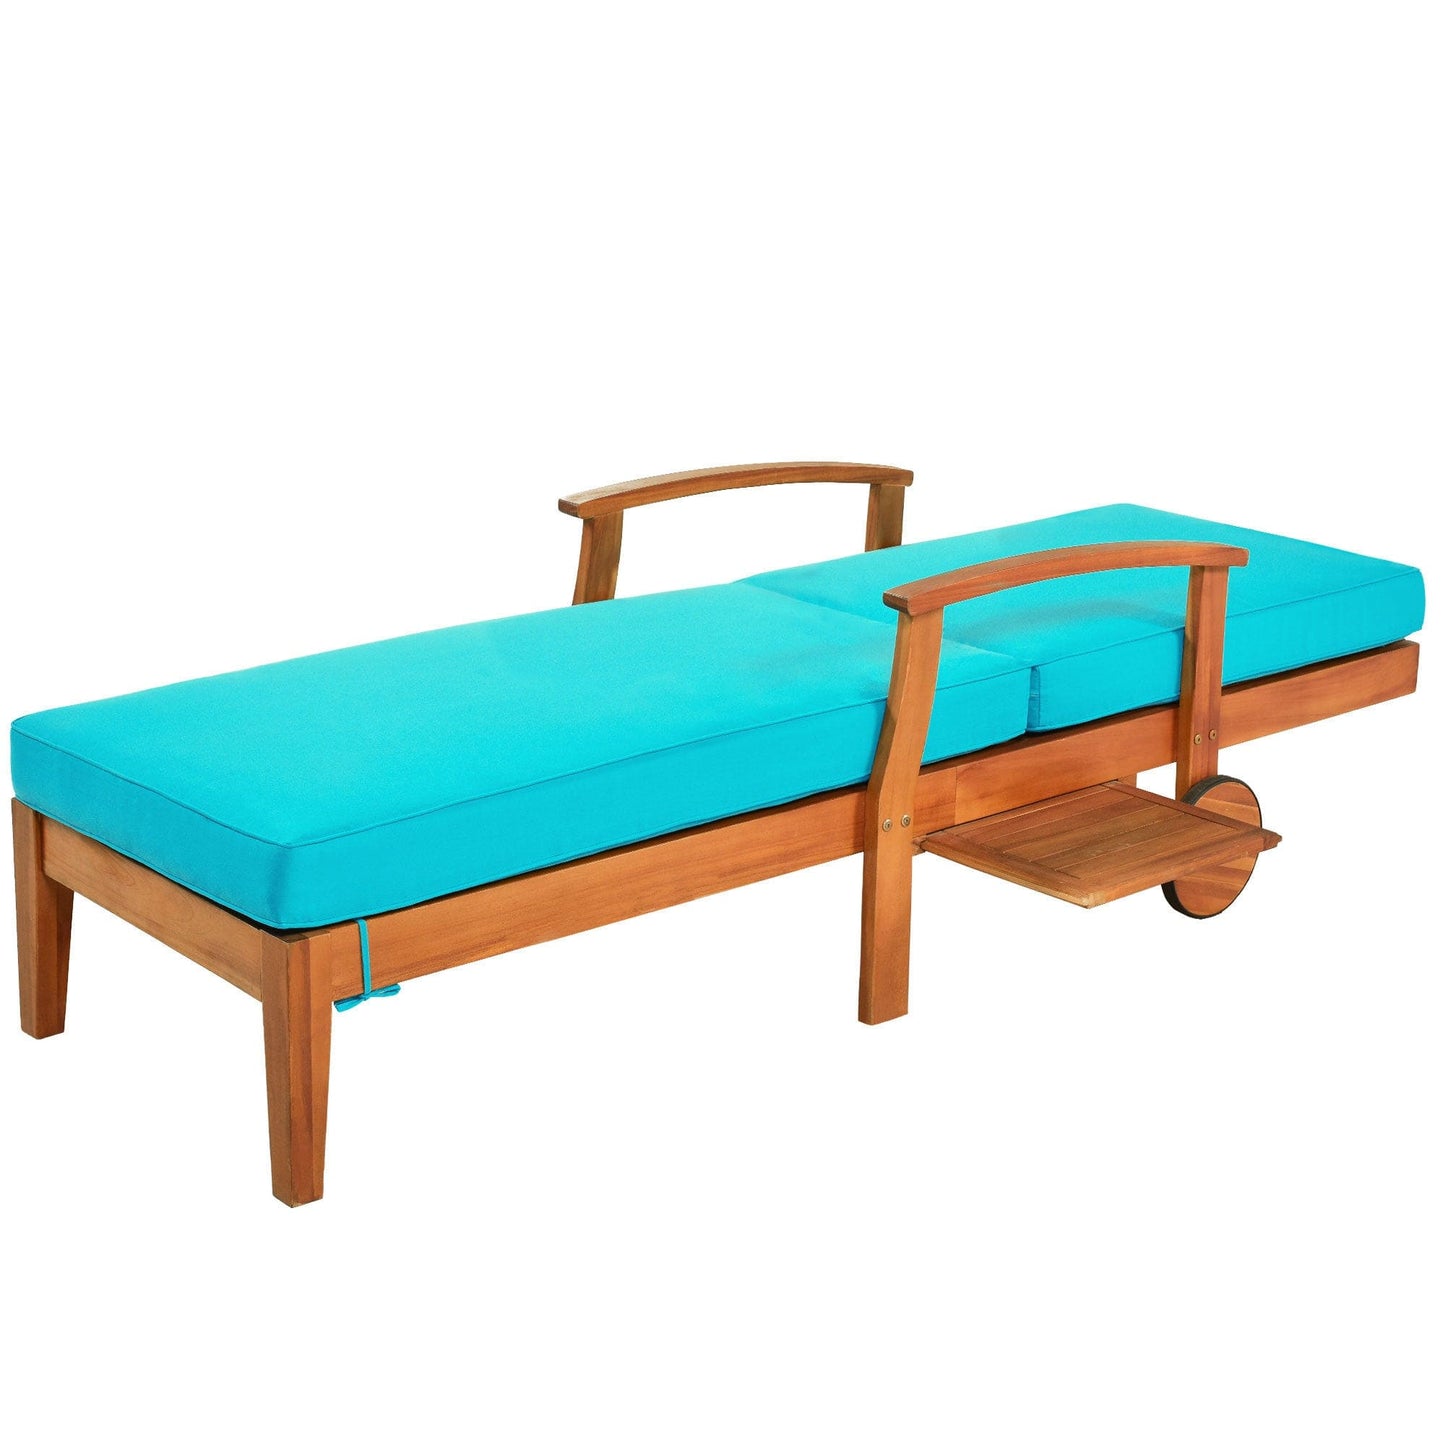 TOPMAX Outdoor Solid Wood 78.8" Blue Chaise Lounge Patio Reclining Daybed with Cushion Brown Wood Finish/Blue Cushion